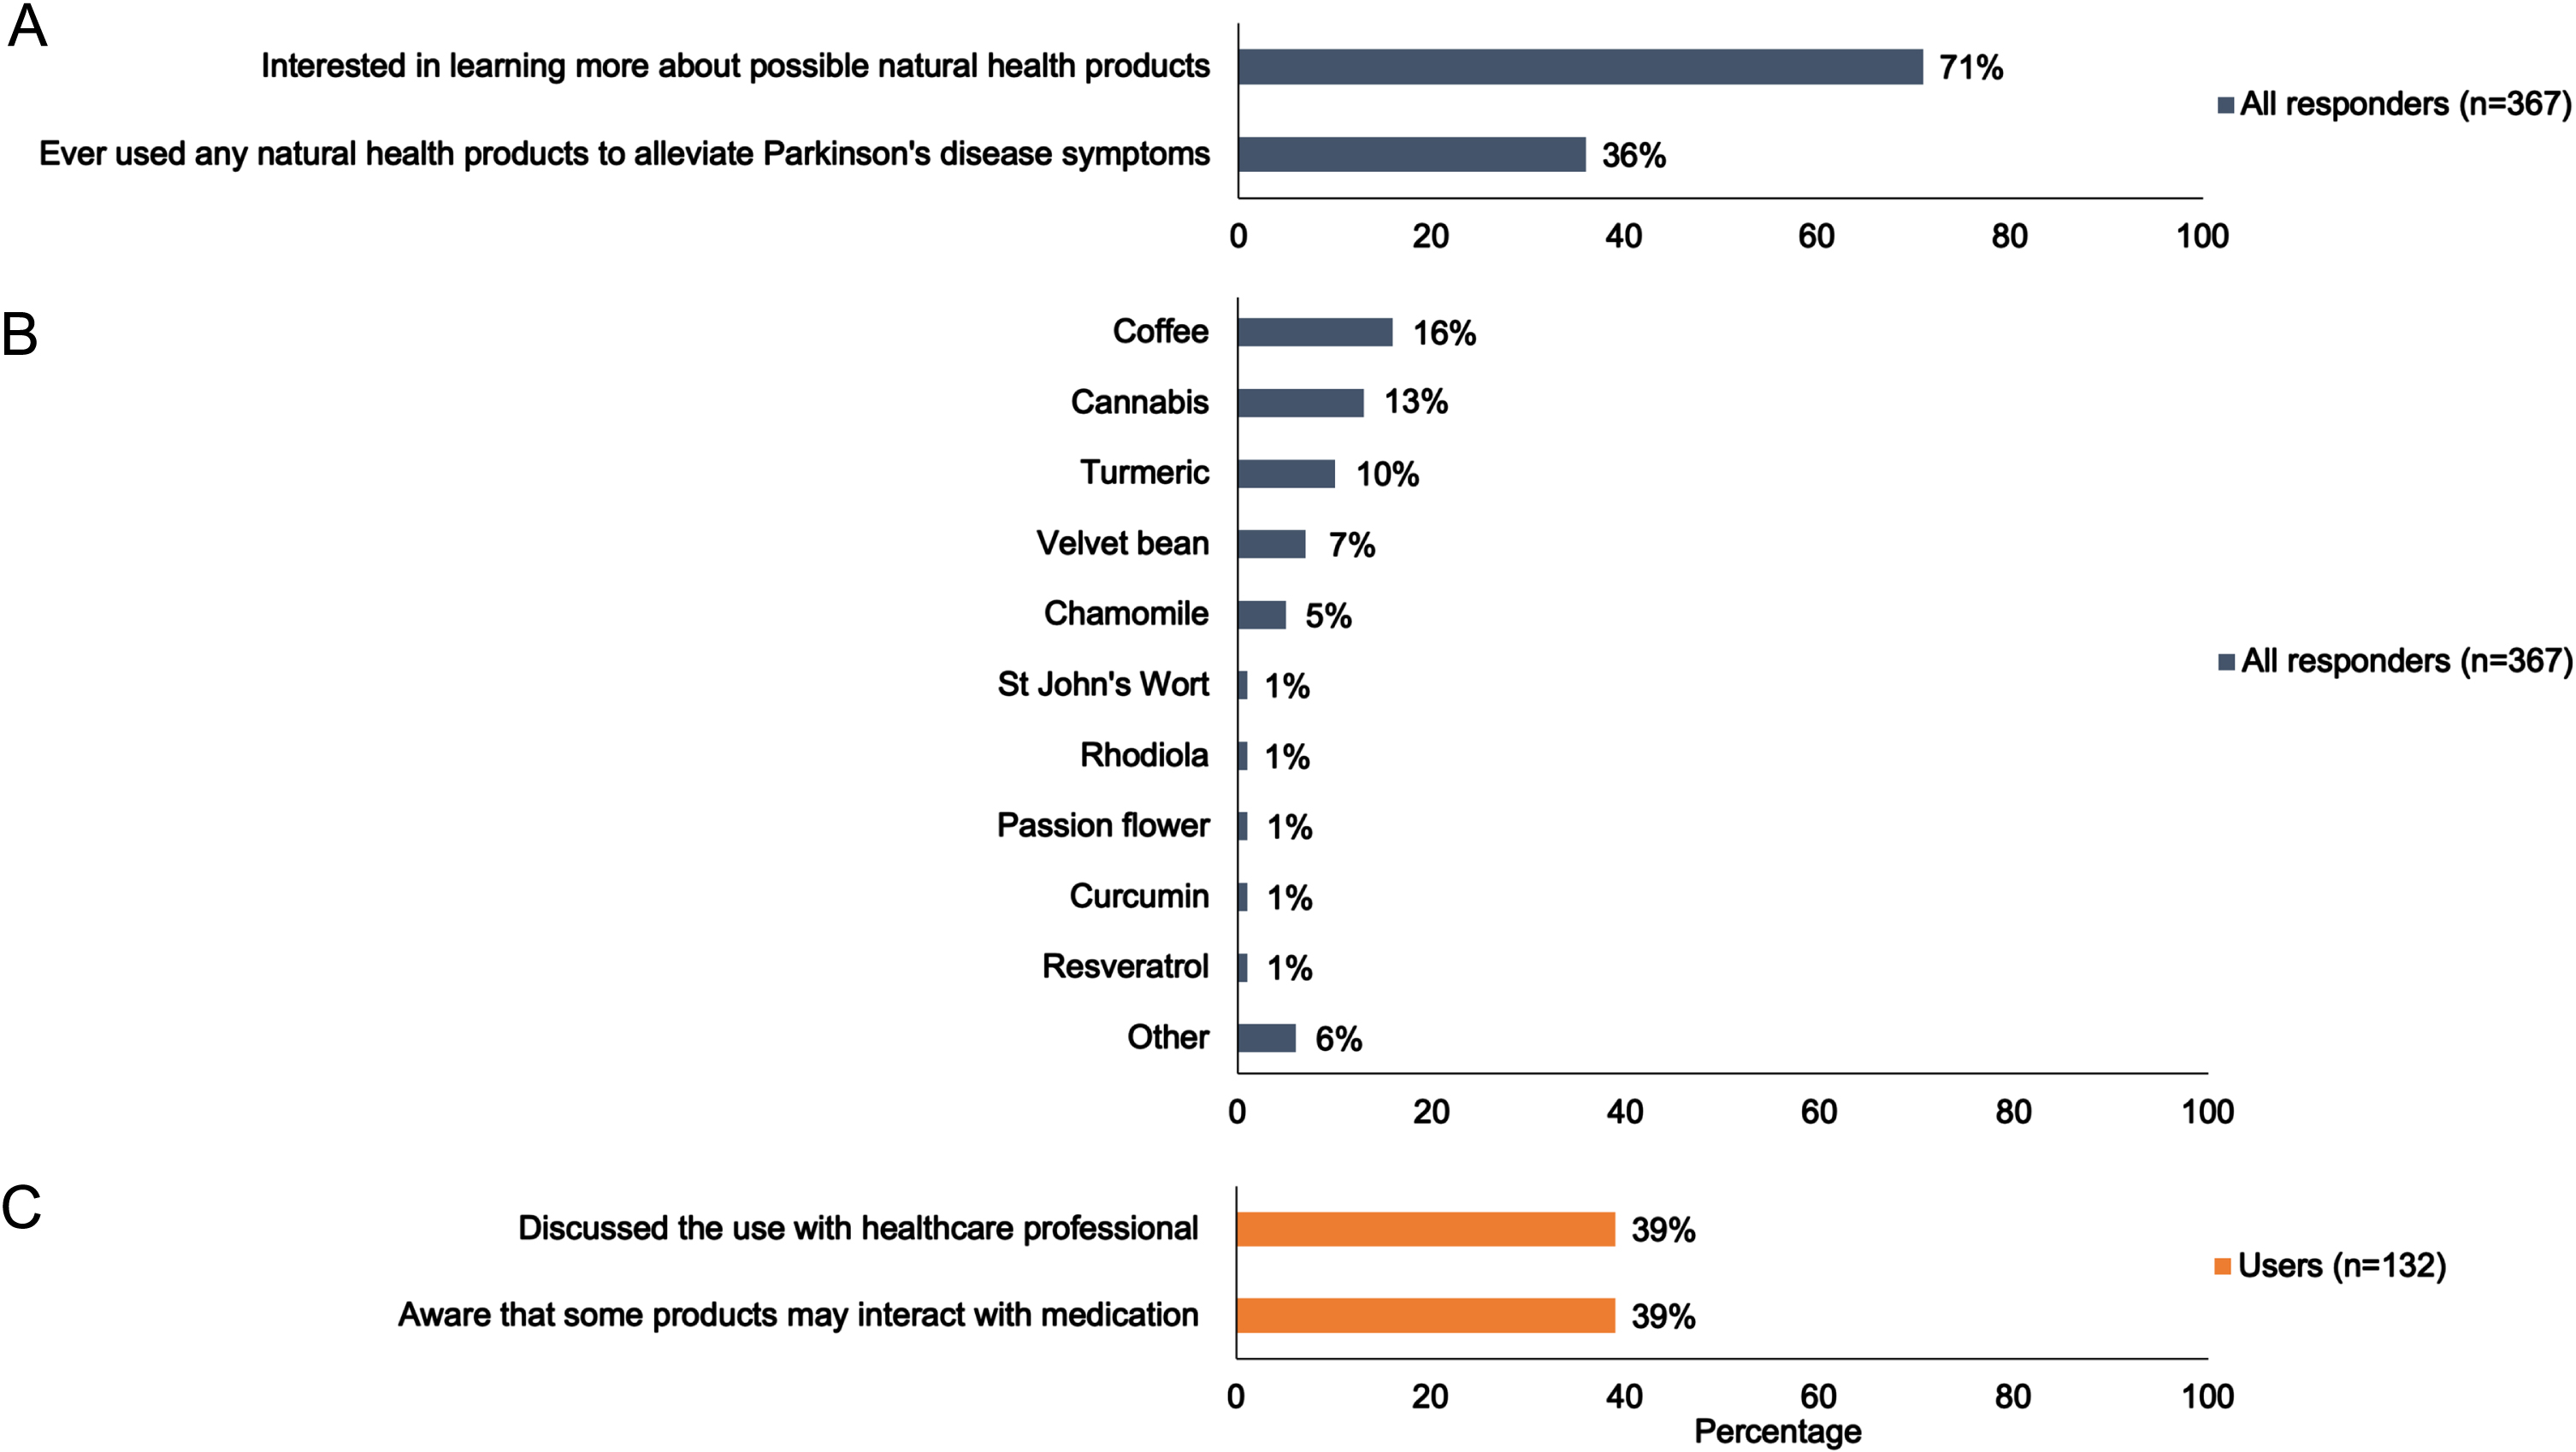 Use of natural health products to alleviate Parkinson’s disease-related symptoms. A) Bar chart illustrating the interest in- and use of natural health products to alleviate Parkinson’s disease-related symptoms. B) Bar chart illustrating the use of different natural health products to alleviate Parkinson’s disease-related symptoms. C) Bar chart illustrating the awareness of potential herb-drug interactions by people with Parkinson’s disease who used natural health products, and the percentage of people with Parkinson’s disease who discussed their use of herbal supplements with their neurologist or Parkinson’s disease nurse specialist. Data illustrated in Fig. 1 are extracted from Table 2.